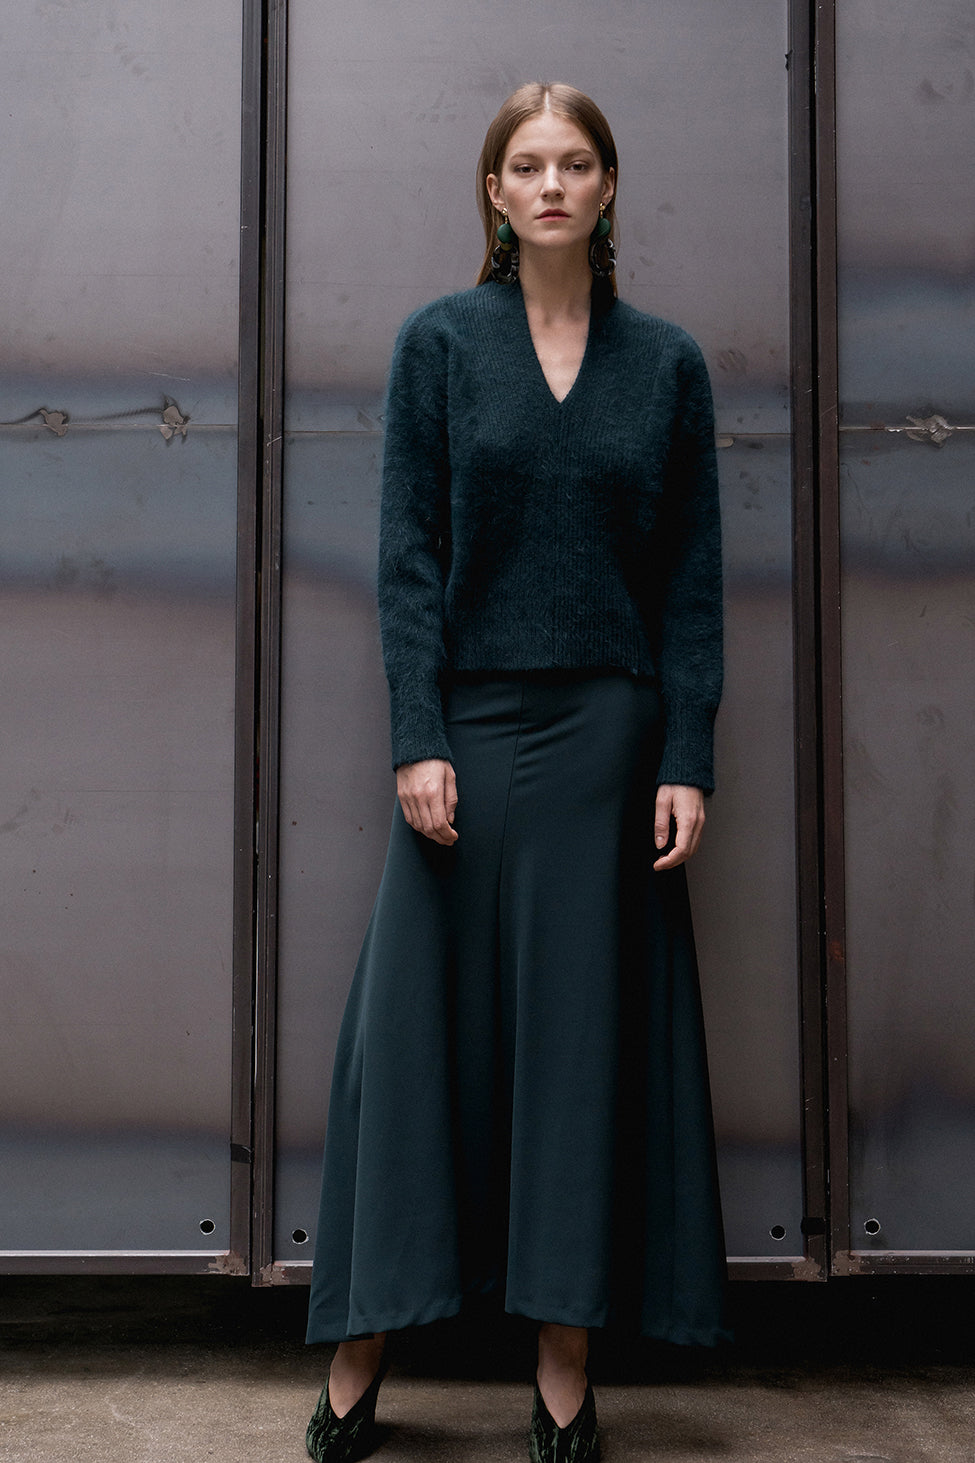 The Cecily angora sweater, long sleeved pullover with deep V-neck in forest green wool blend. Dropped shoulder.